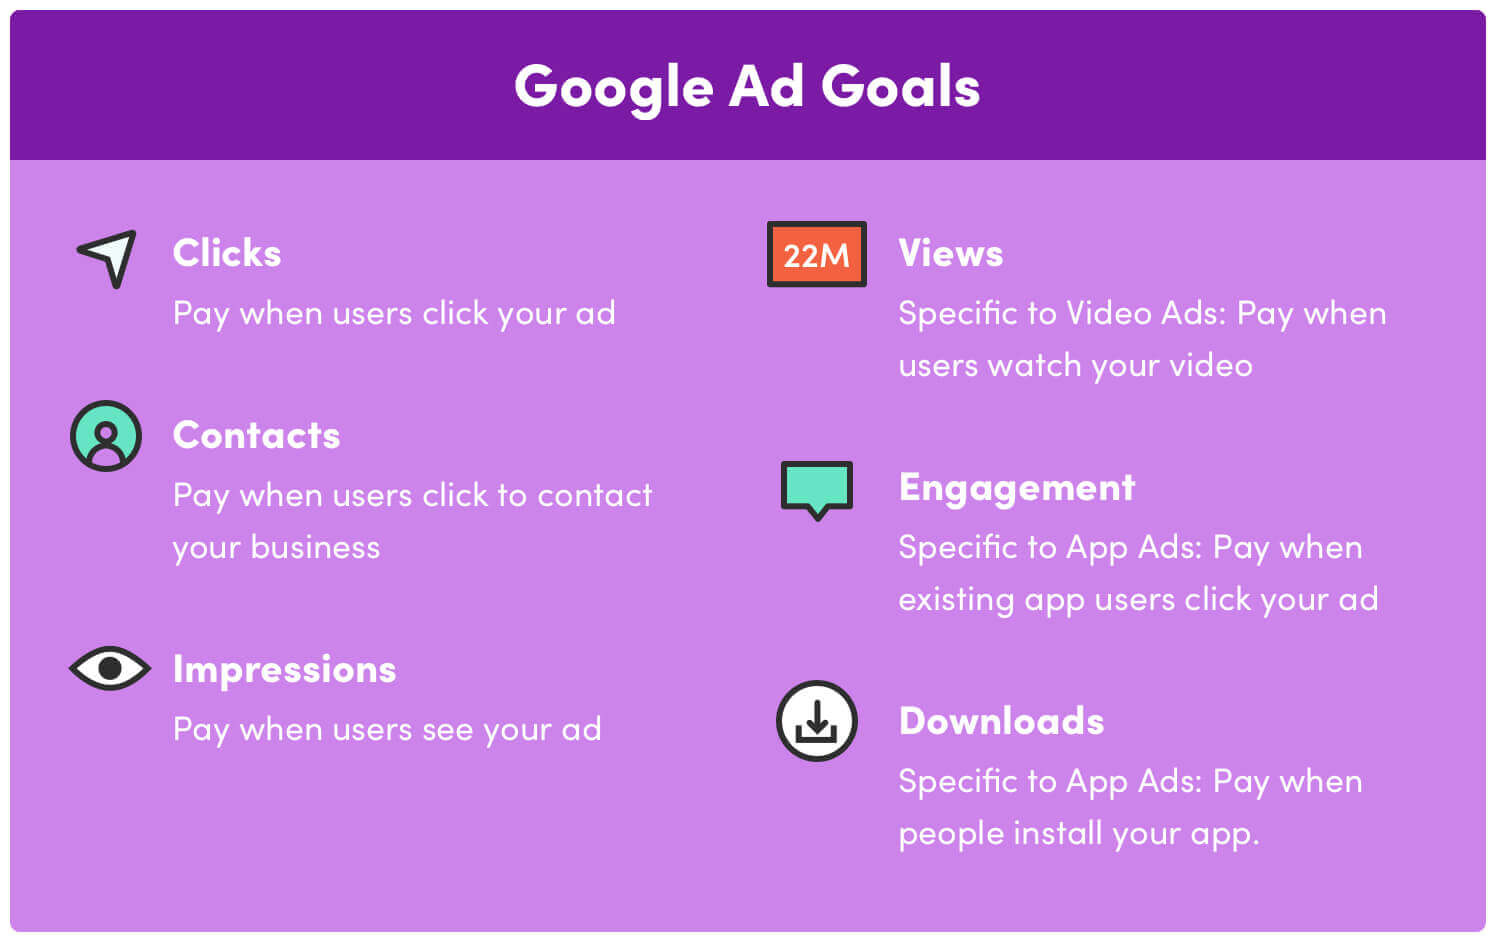 A table titled “Google Ad Goals”. There are six categories: Clicks, Contacts, Impressions, Views, Engagement, and Downloads”, along with descriptions of each type.